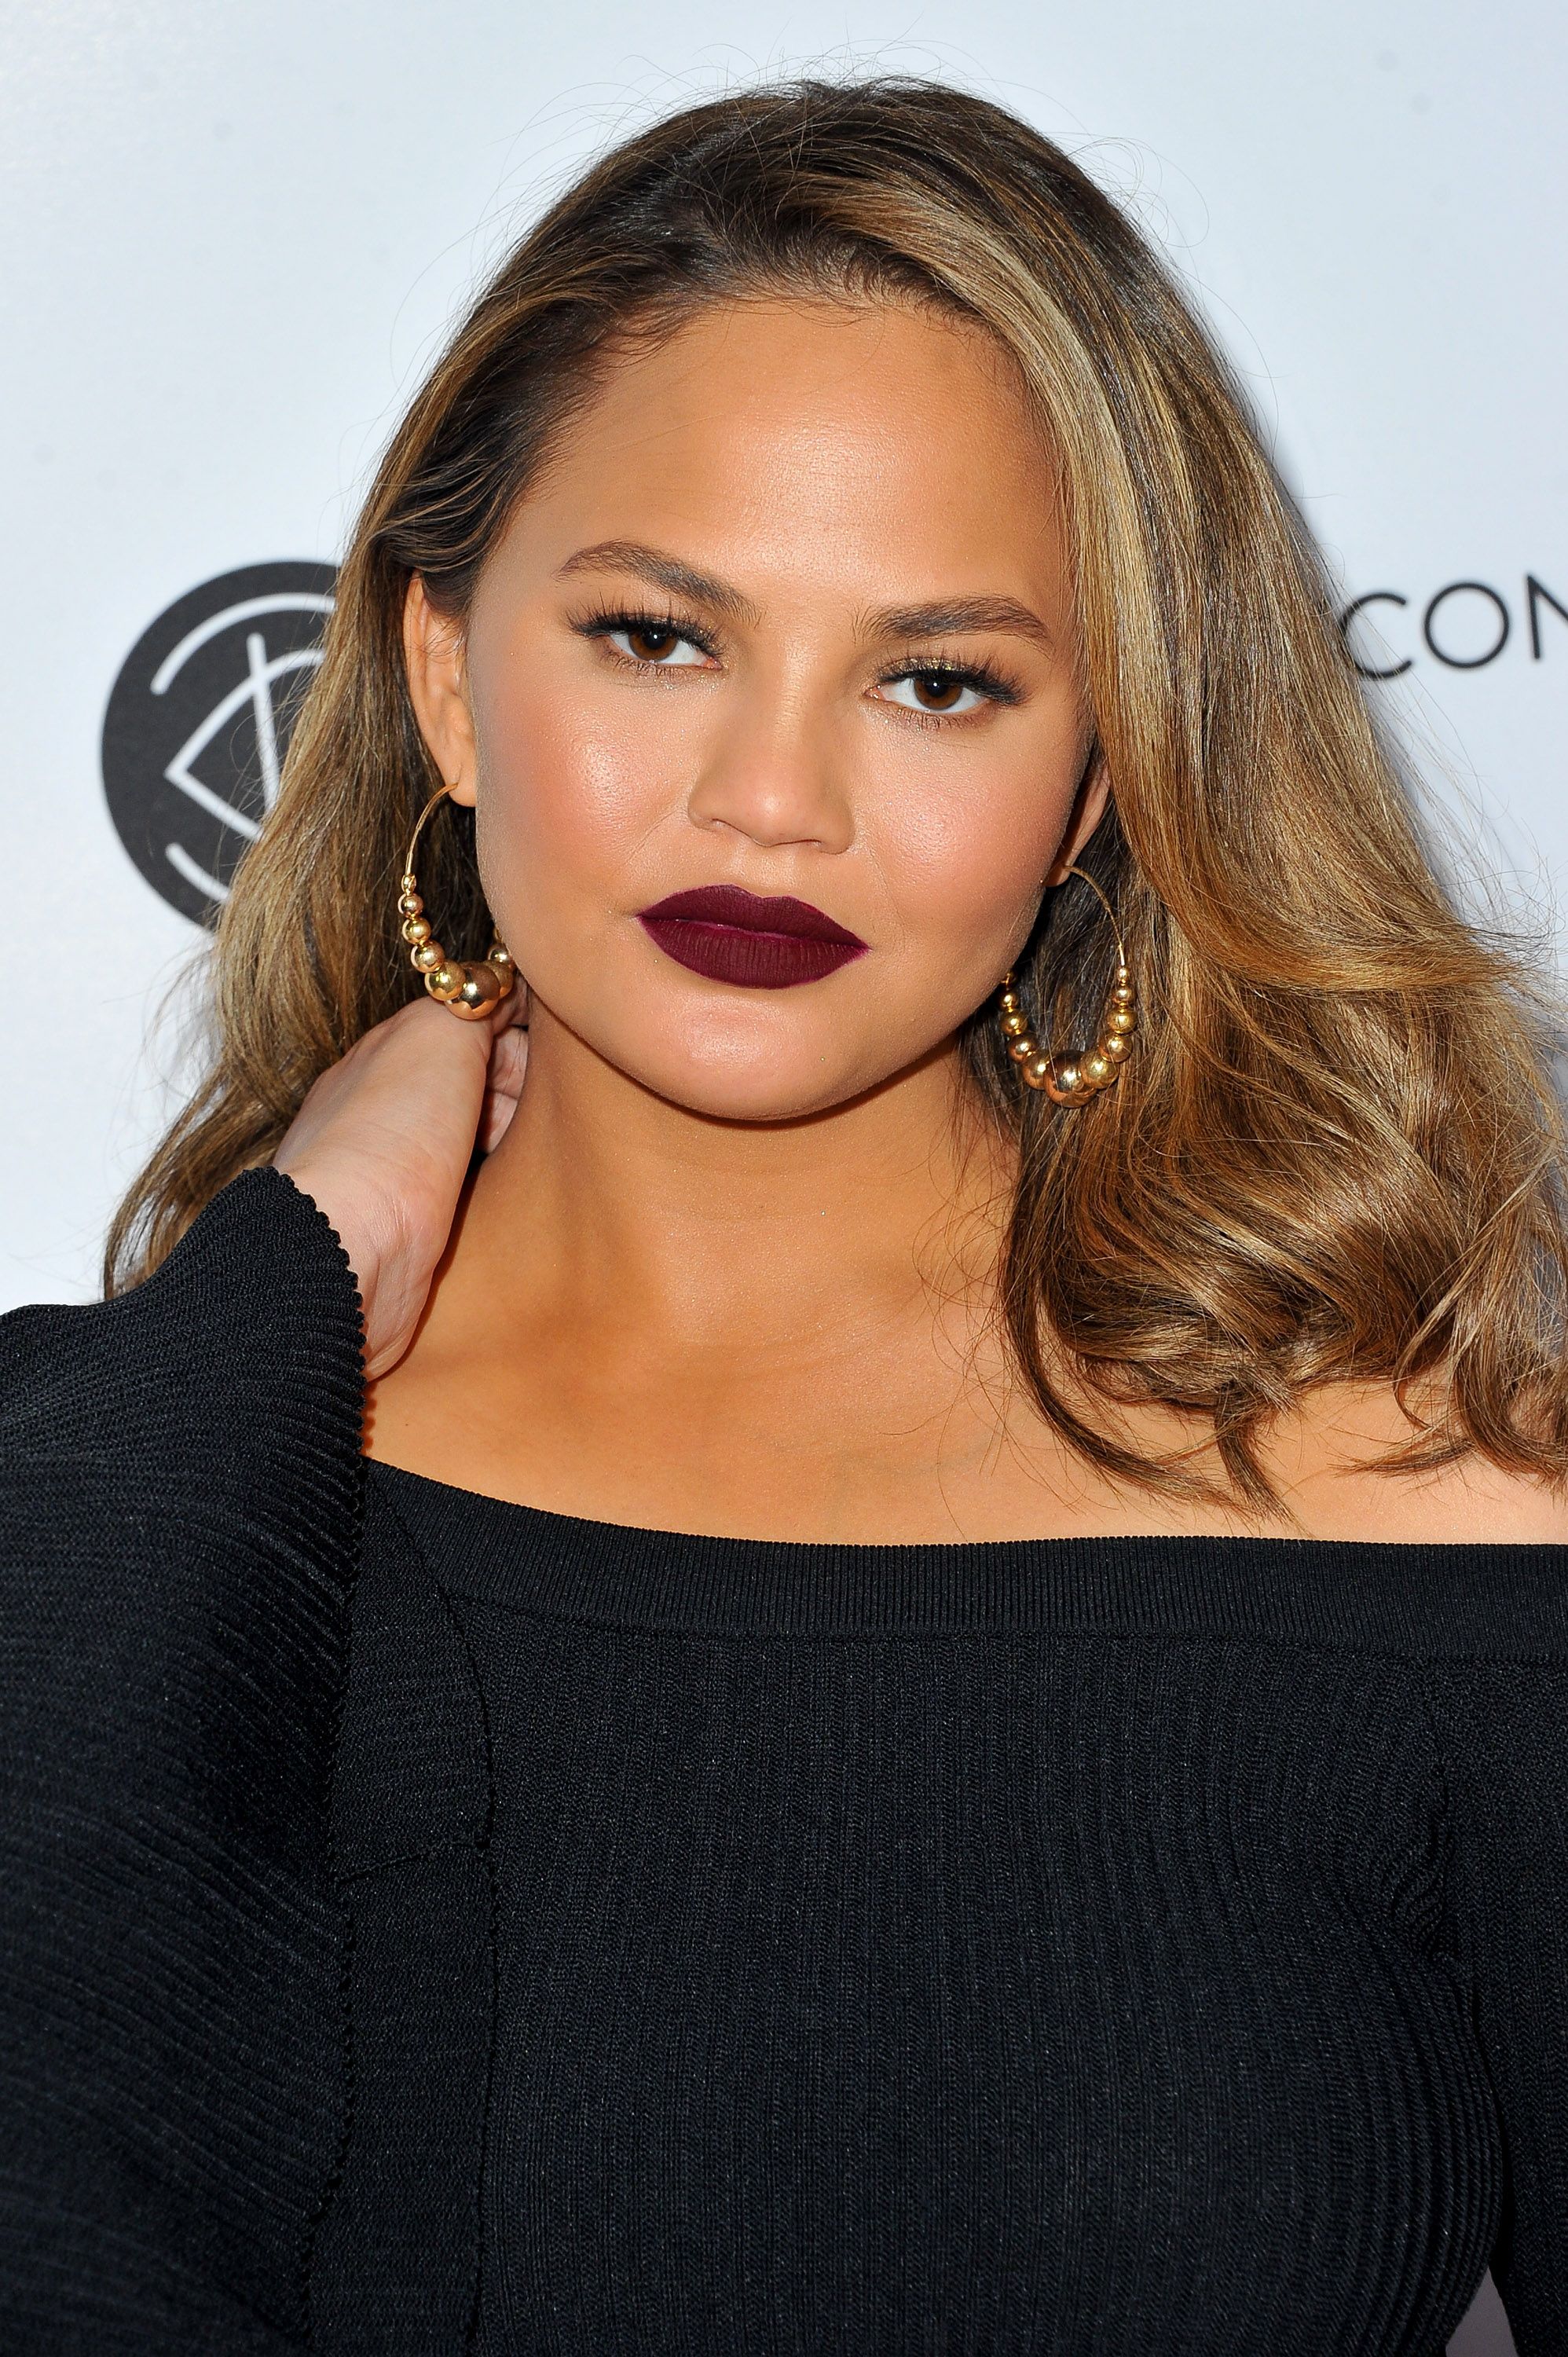 Model Chrissy Teigen at the 5th Annual Beautycon Festival Los Angeles | Photo: Getty Images 